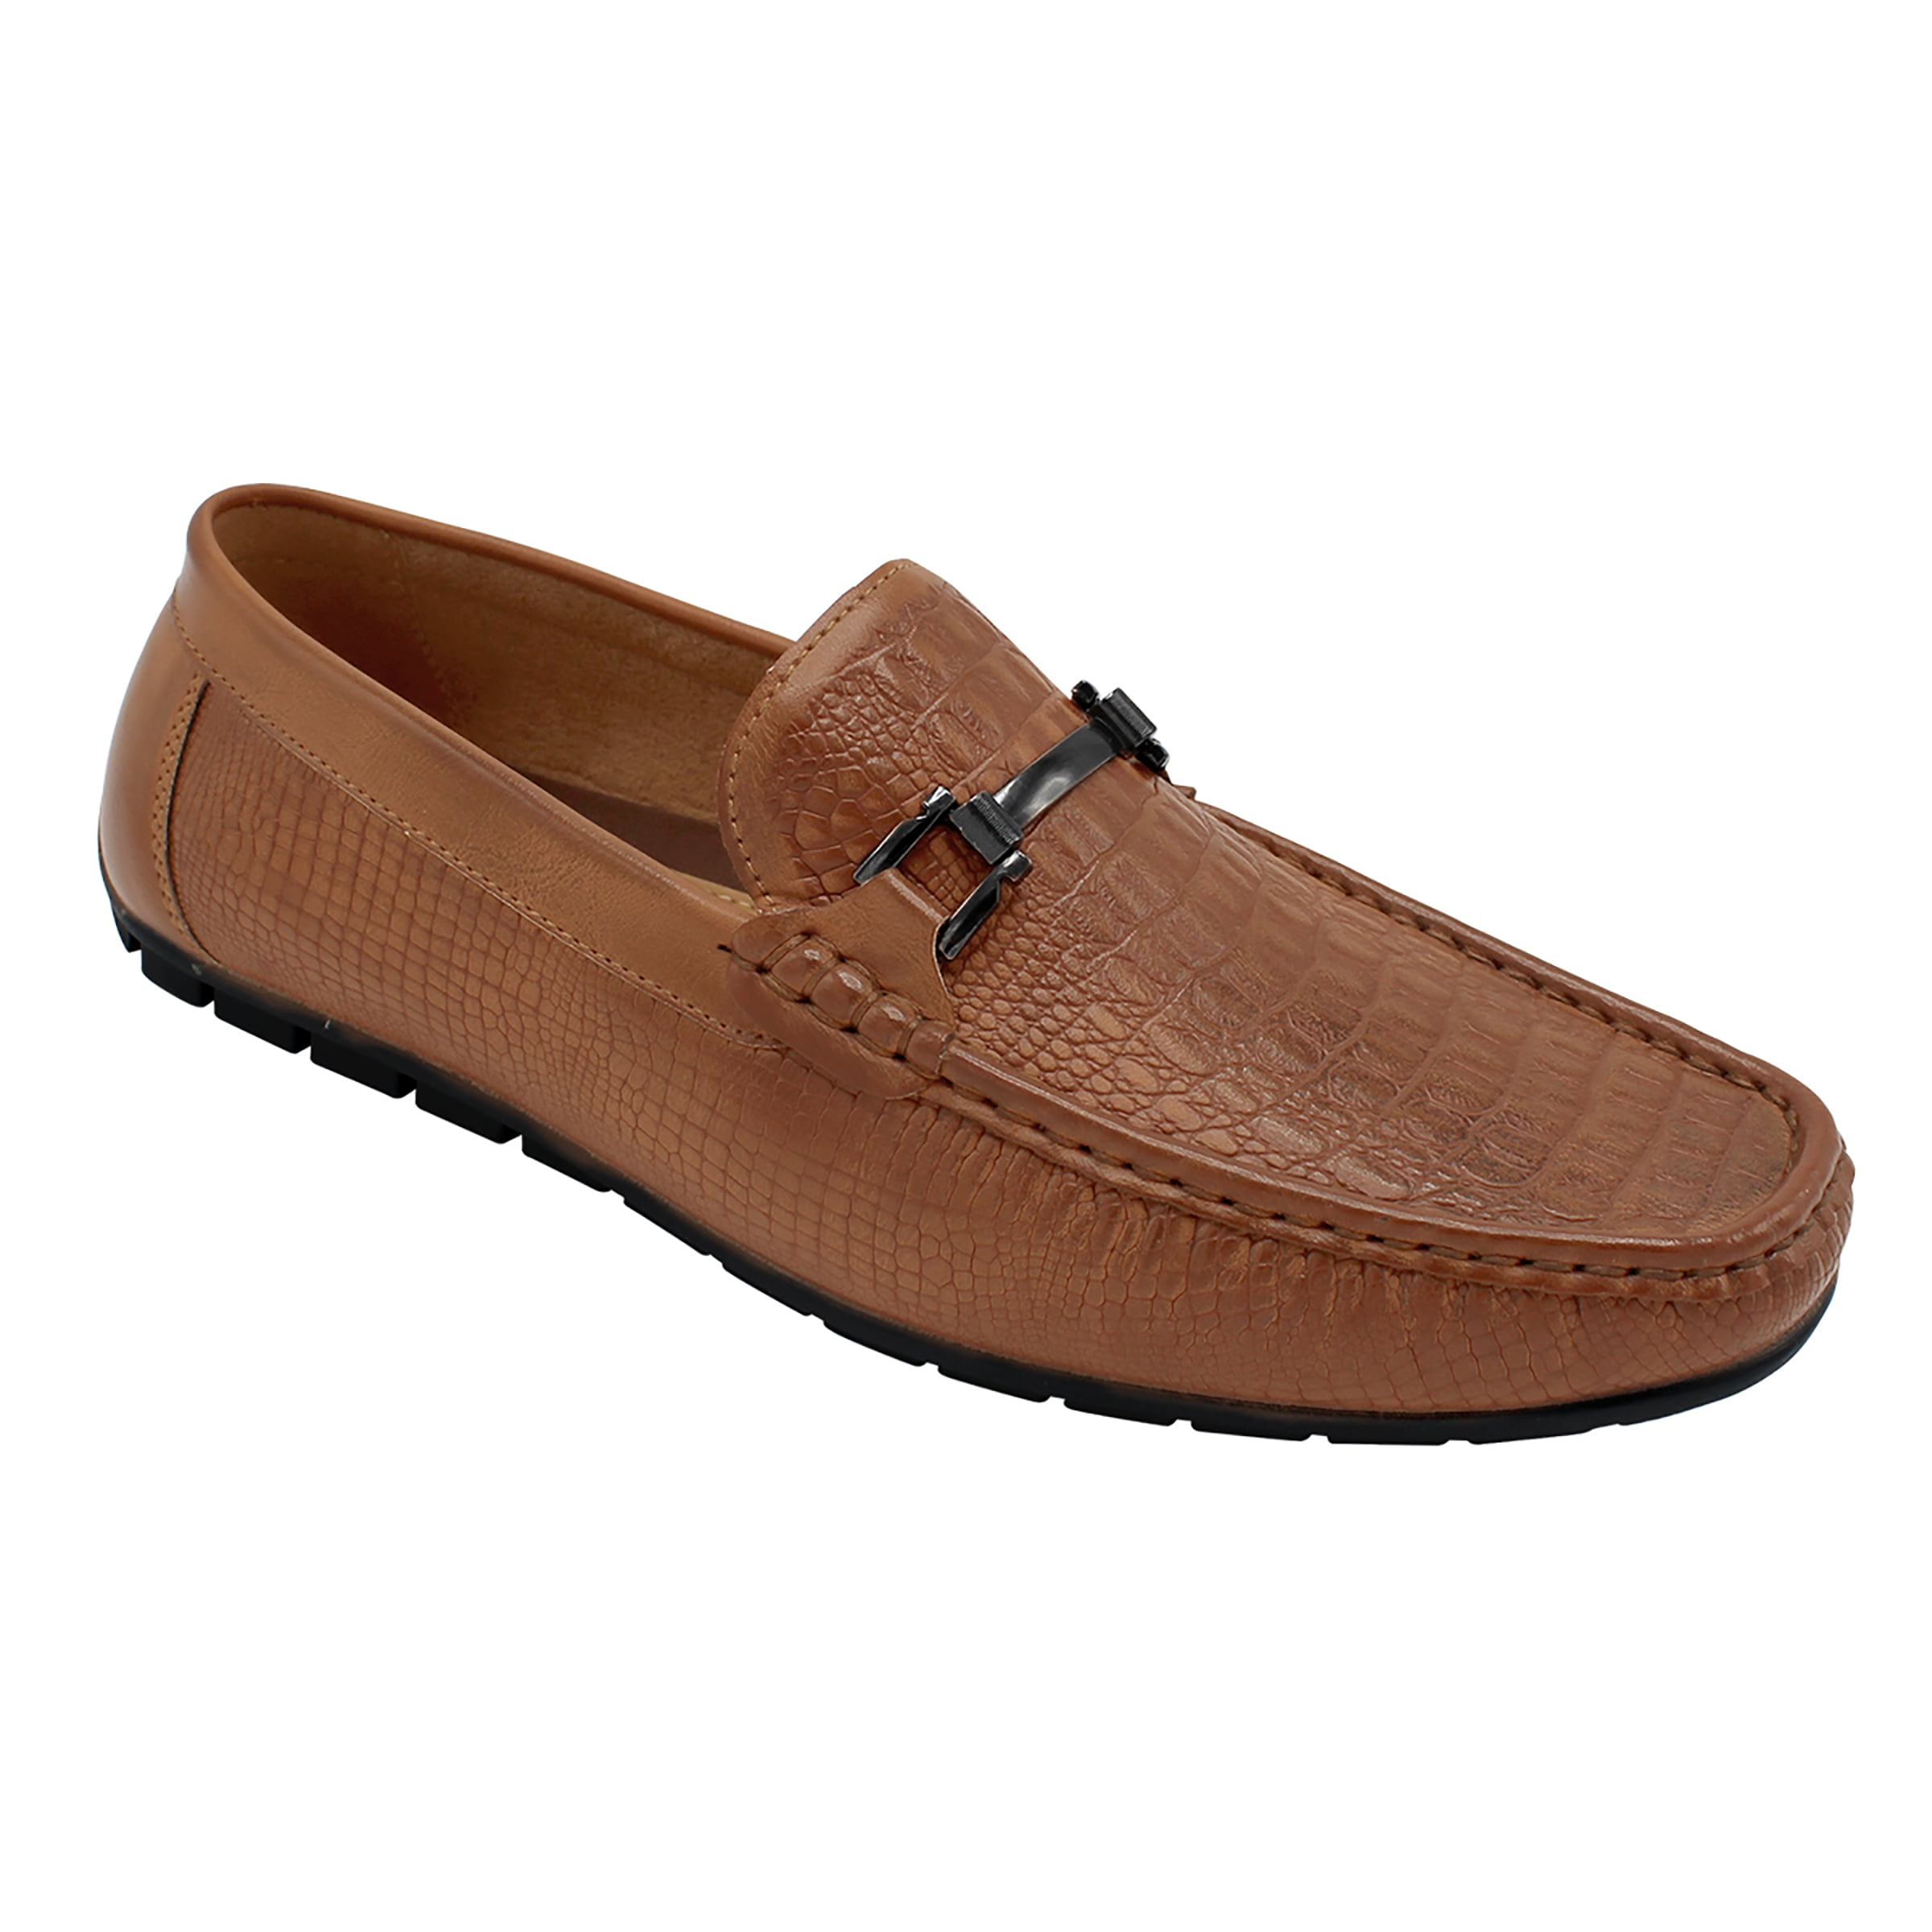 Mario Lopez - Men’s Loafers Dress Casual Loafers for Men Slip-on ...